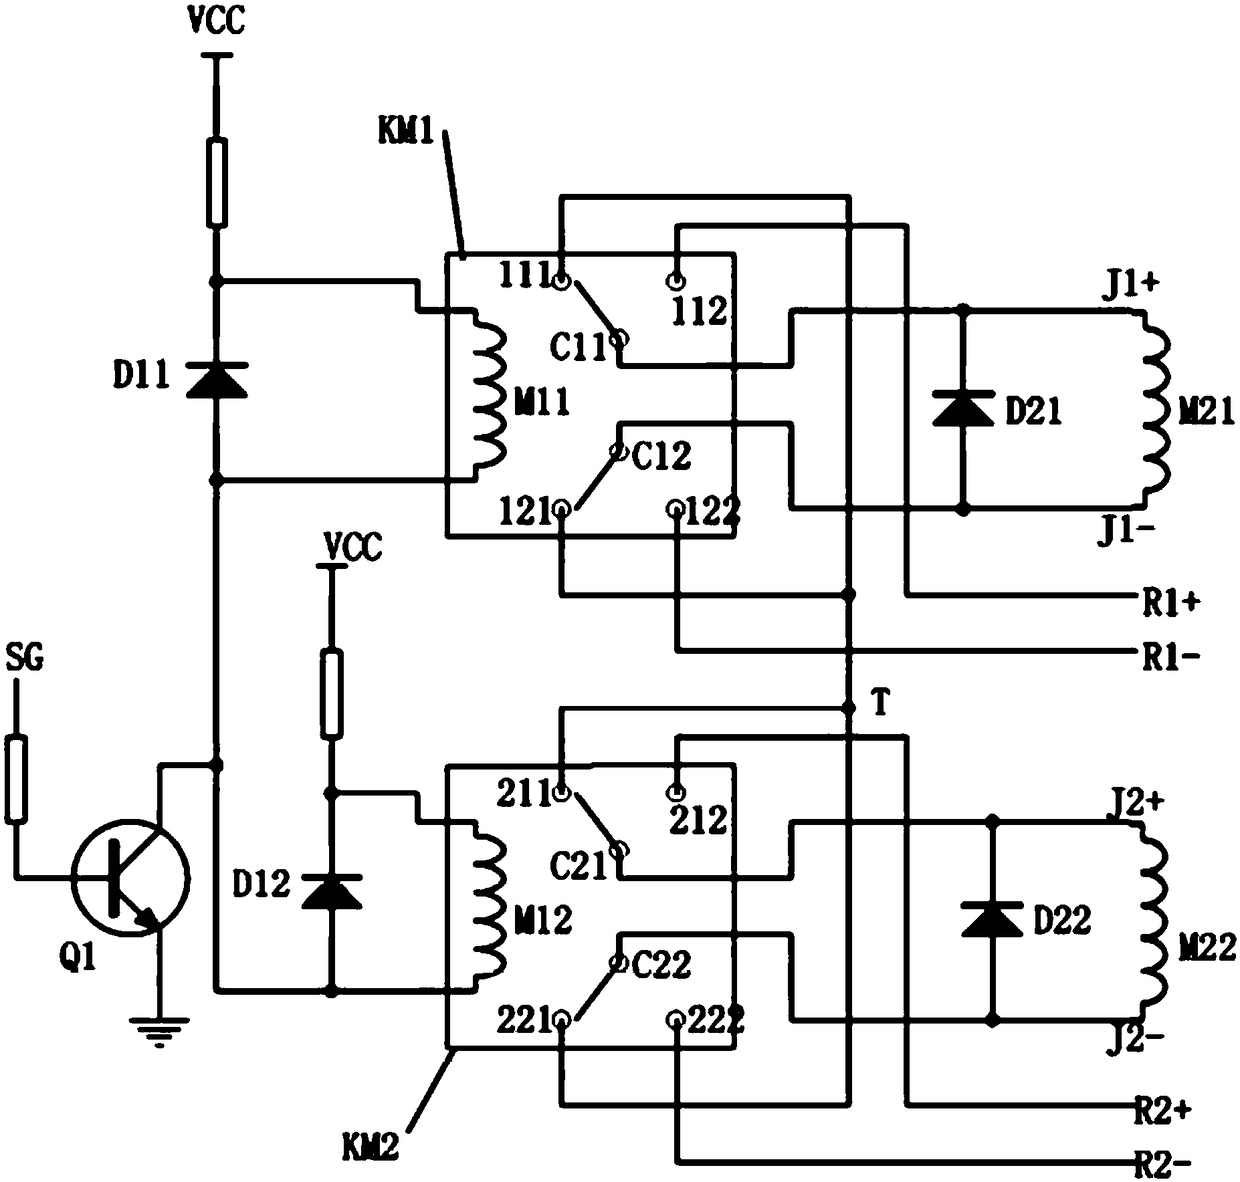 A system for increasing the positioning torque of stepper motors